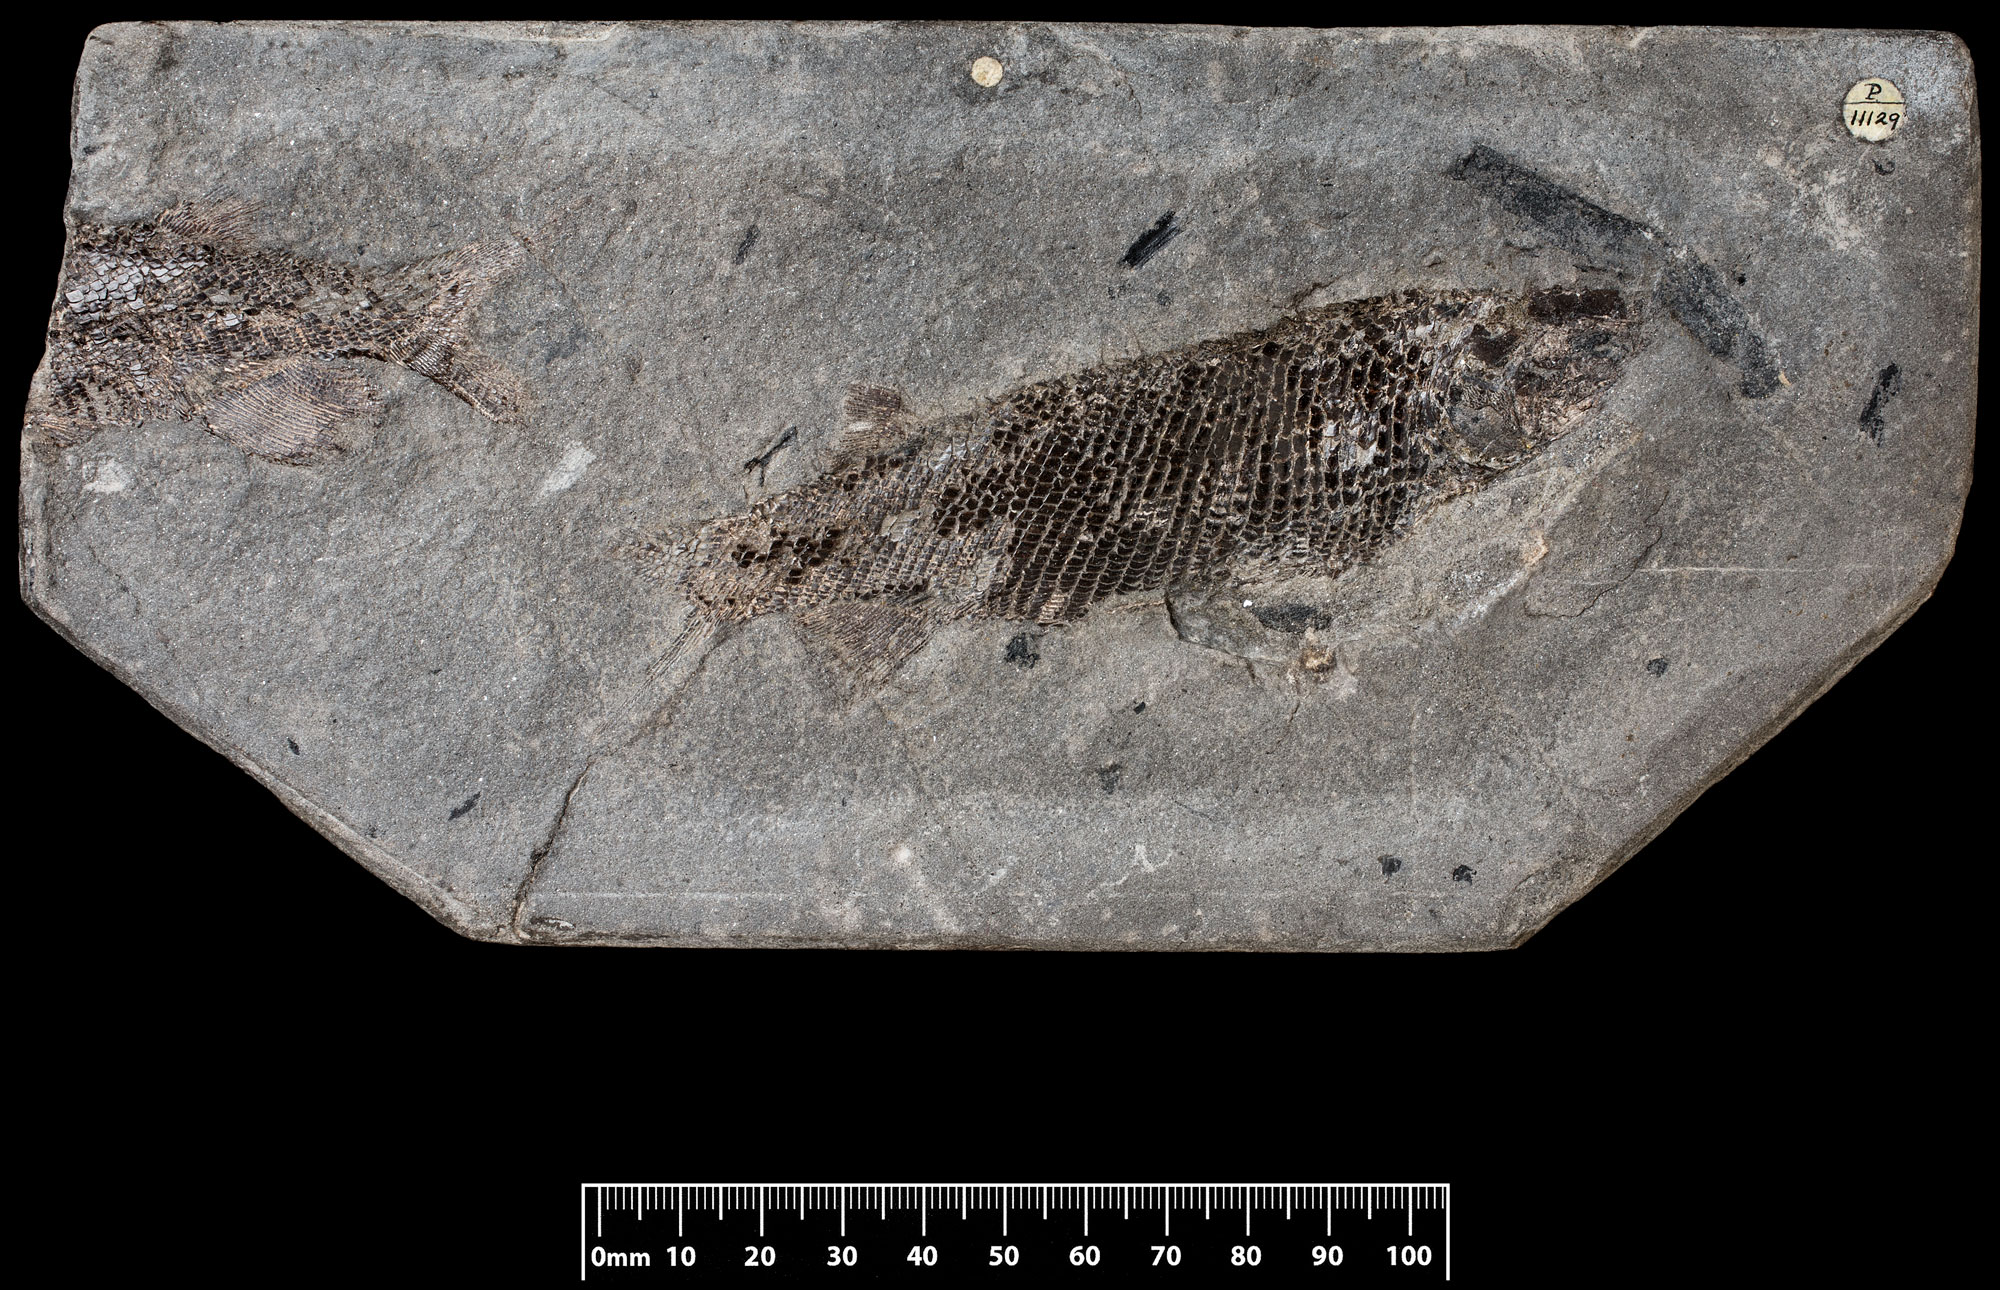 Photo of a fossils of a rock from the Triassic of Virginia showing one nearly complete fish and the tail end of a second fish.